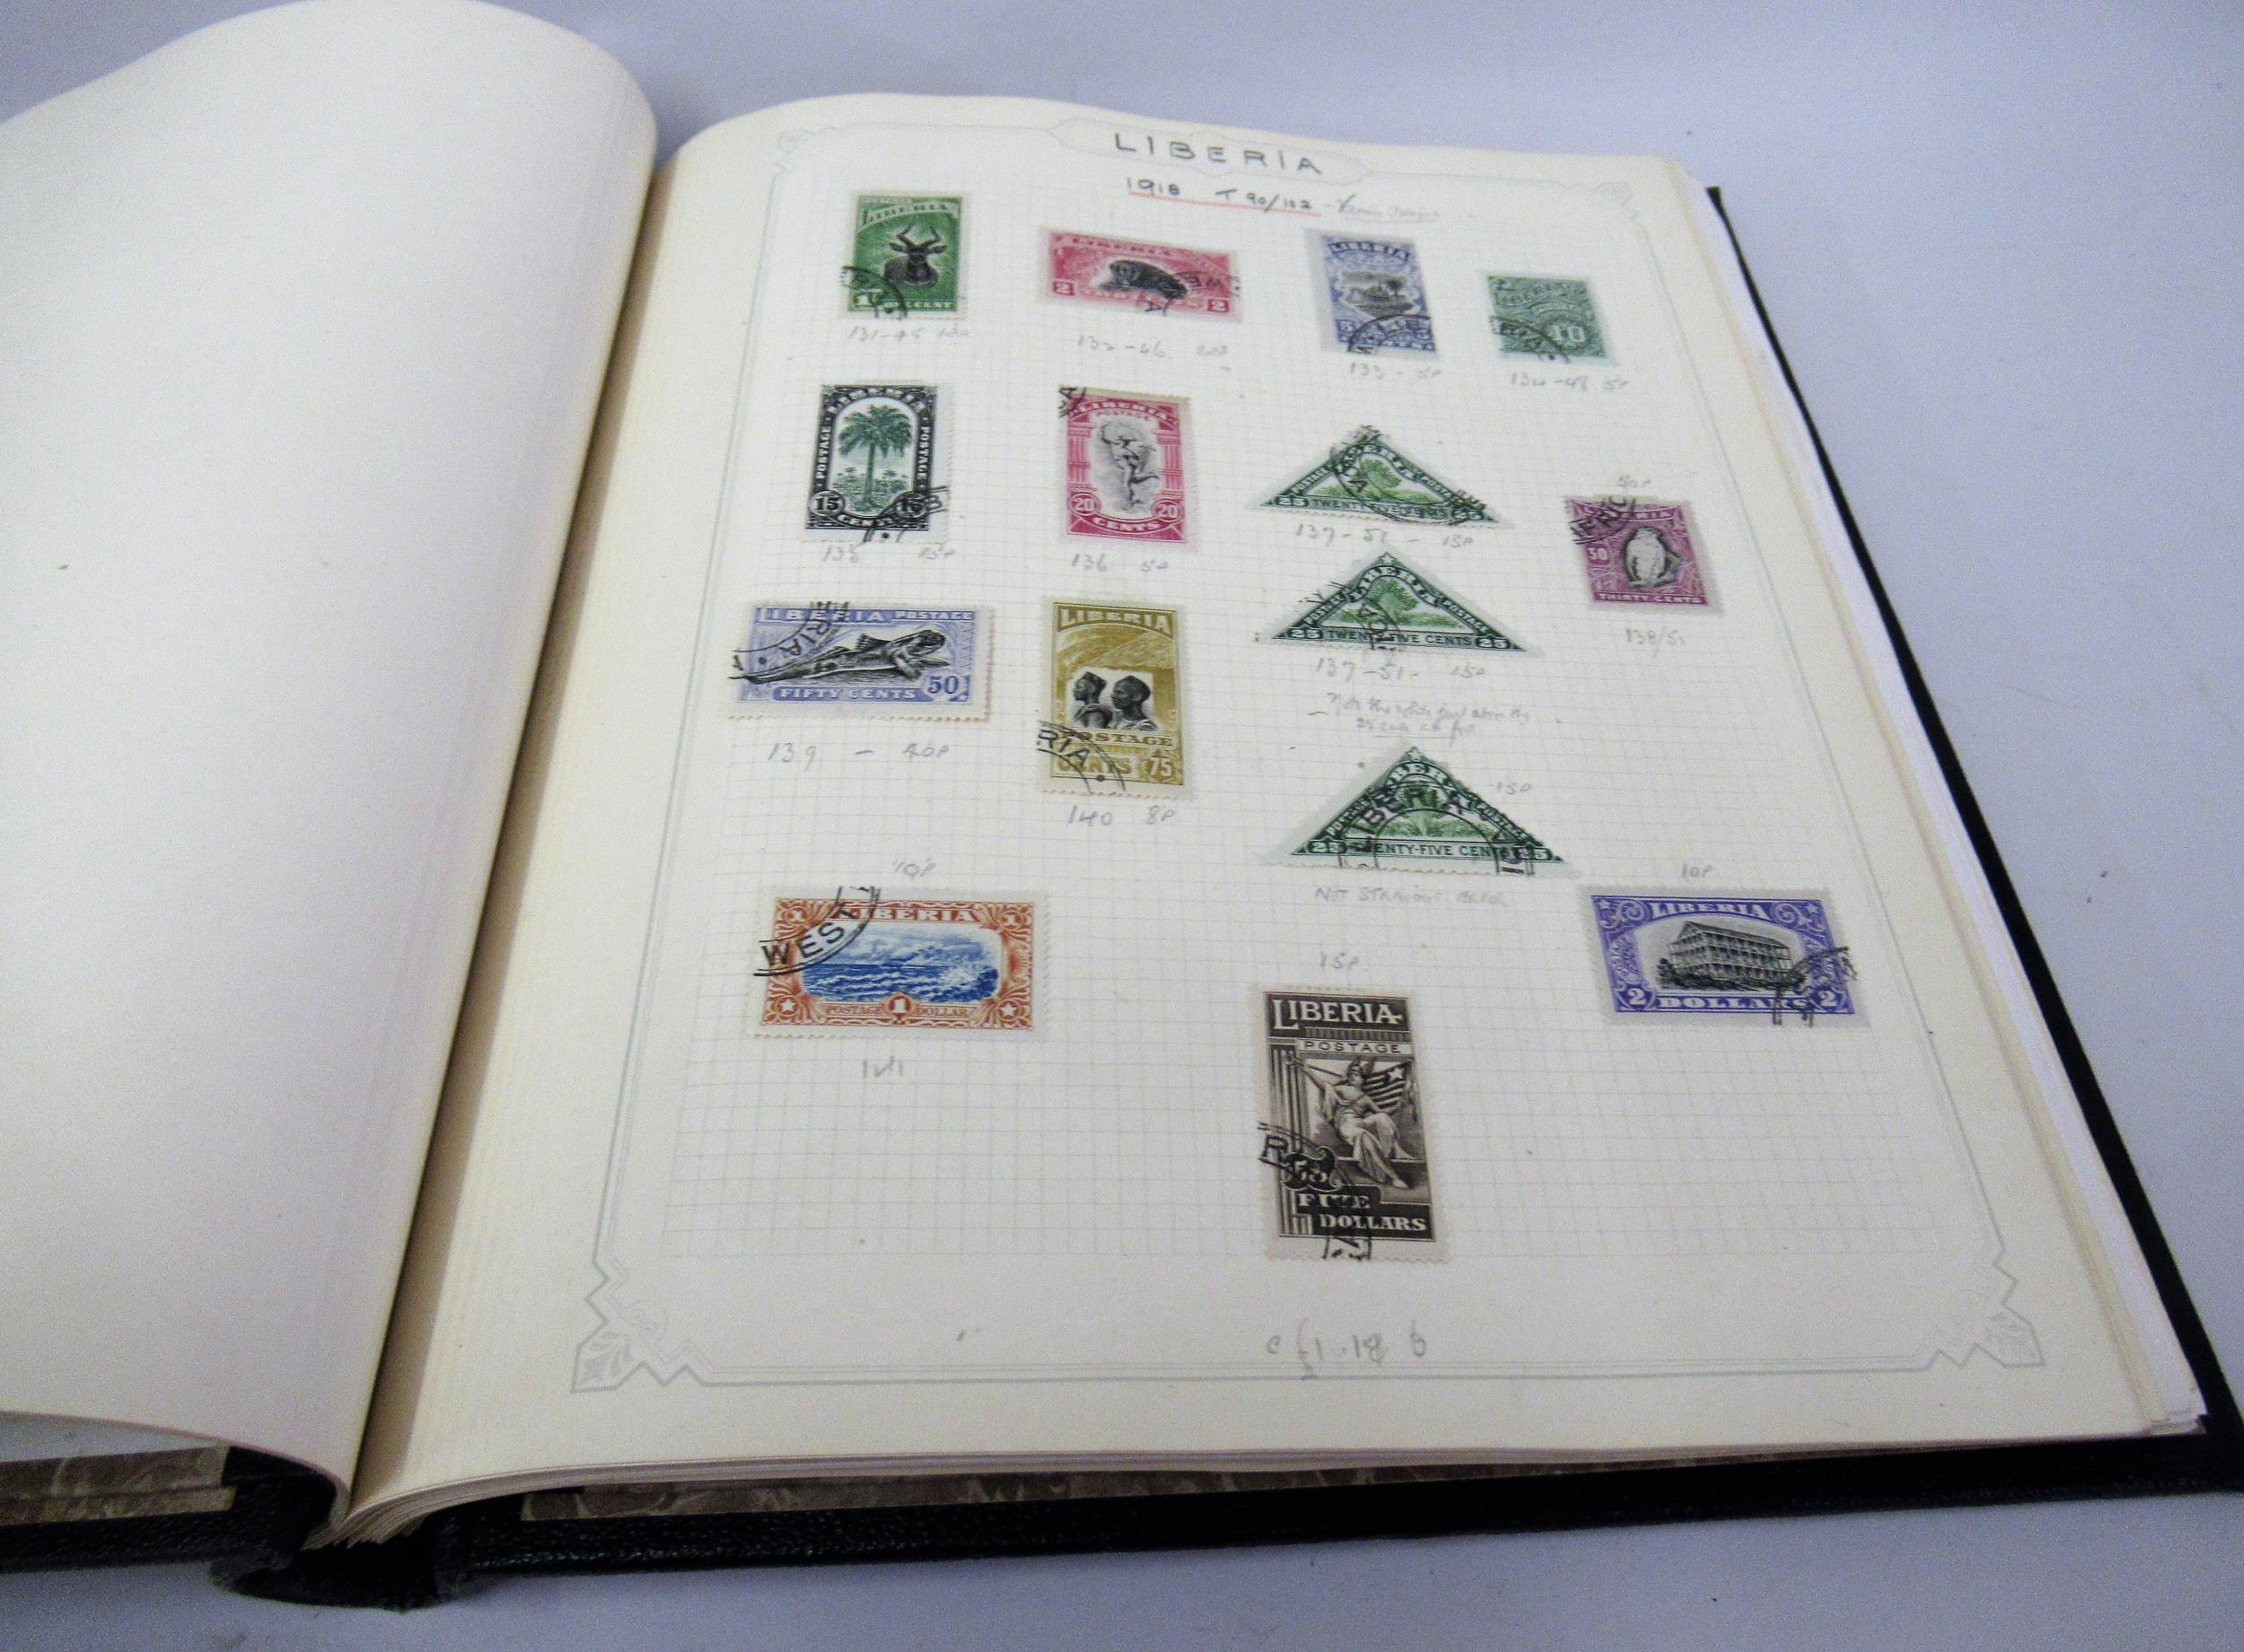 Black album containing a collection of World stamps, including Liberia - Image 2 of 2